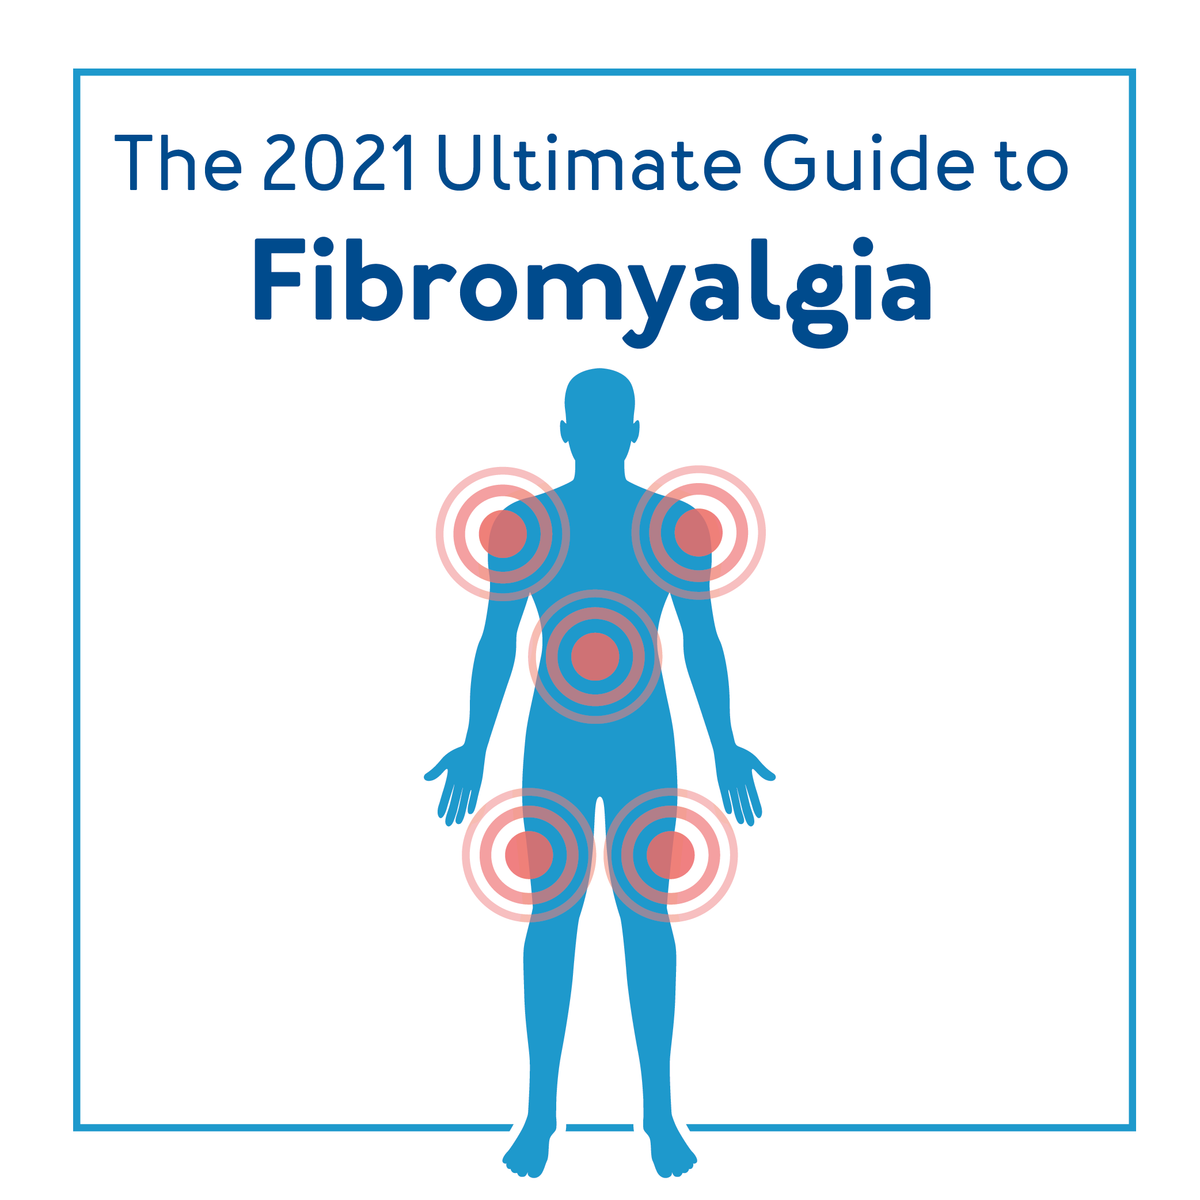 A graphic of a persons body outline with various red circles showing pain and text The Ultimate Guide to Fibromyalgia